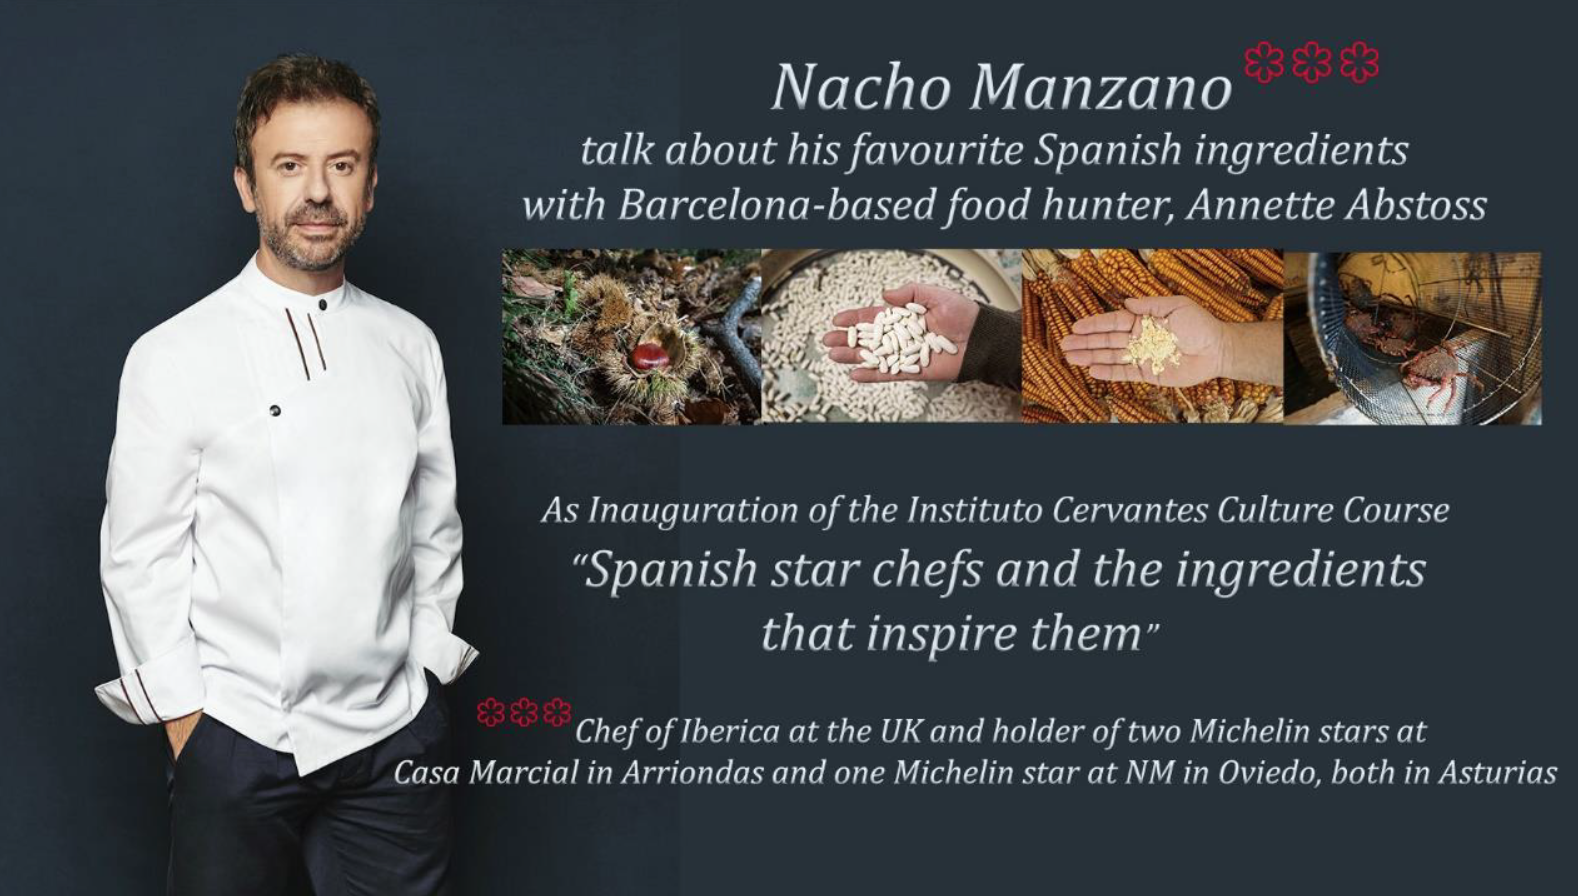 SPANISH STAR CHEFS AND THE INGREDIENTS THAT INSPIRE THEM